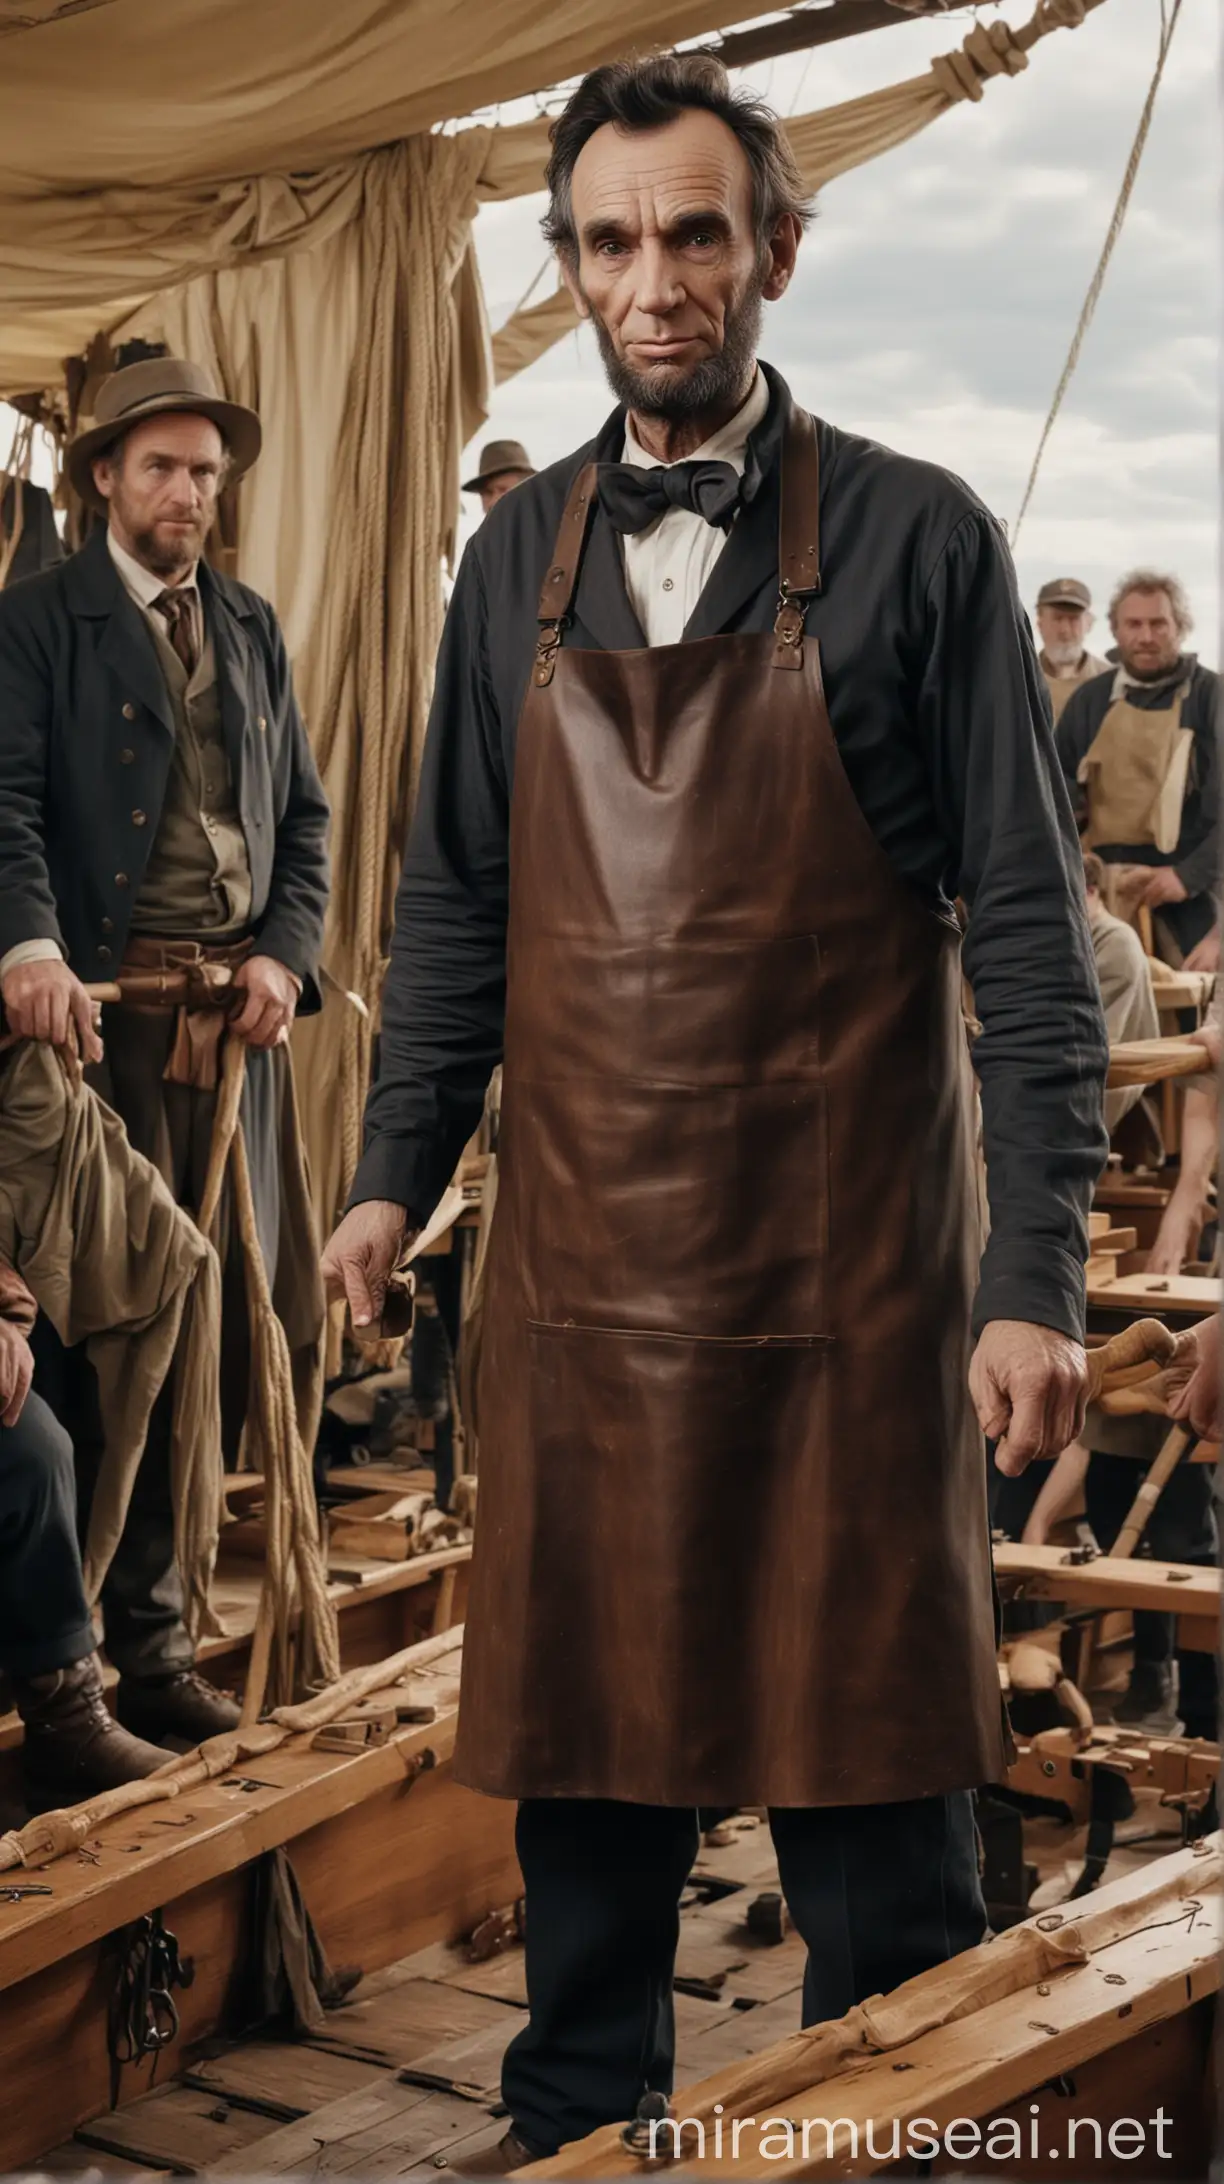 Abraham Lincoln Wearing Leather Apron on Boat with Woodworkers